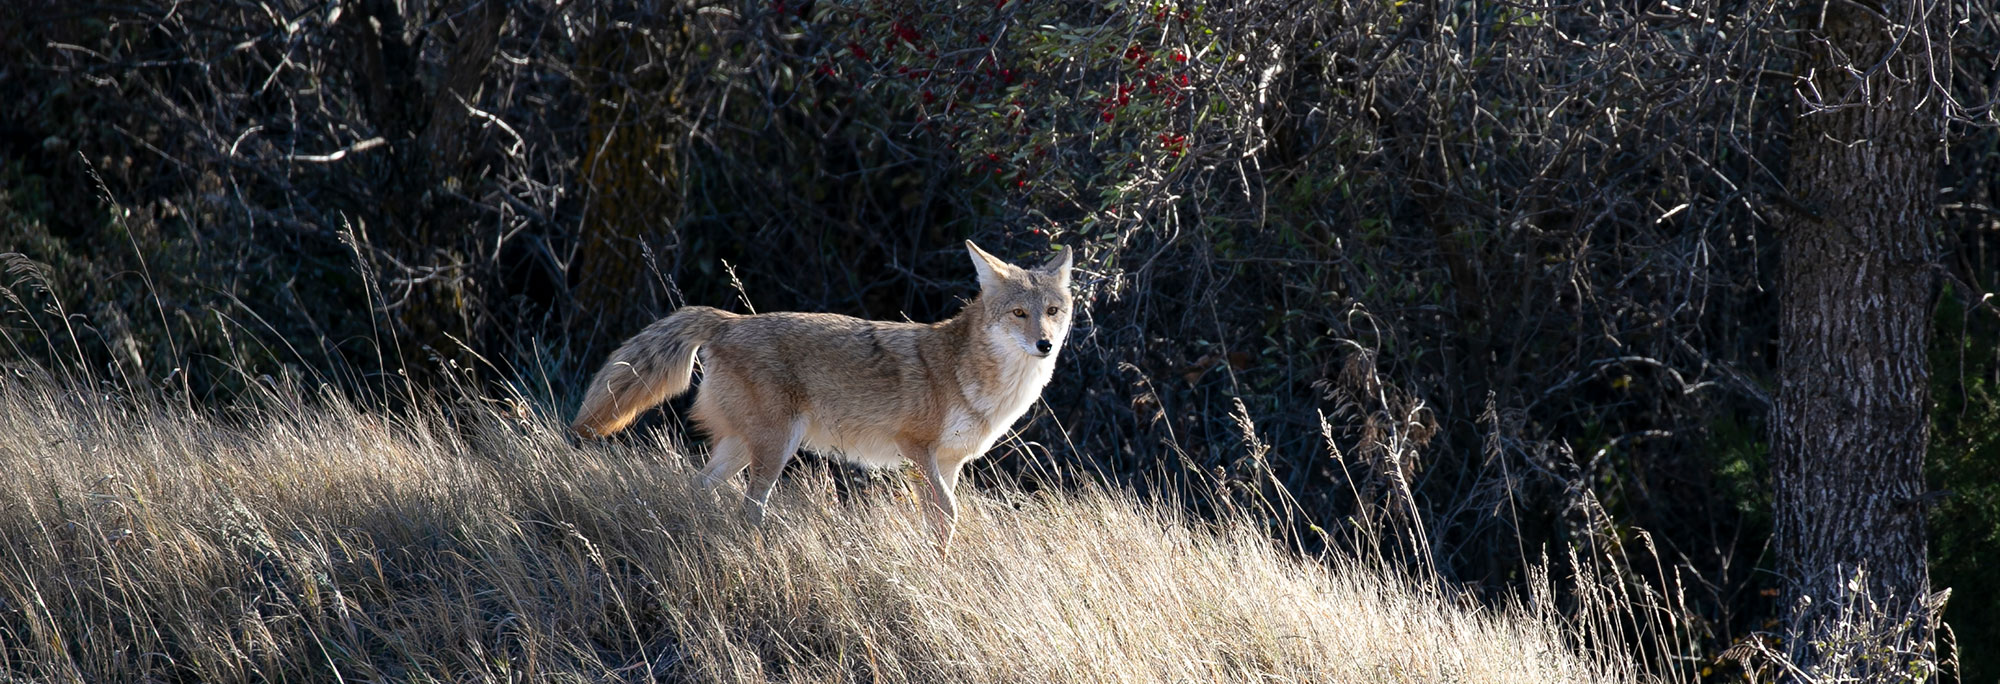 Coyote in the badlands